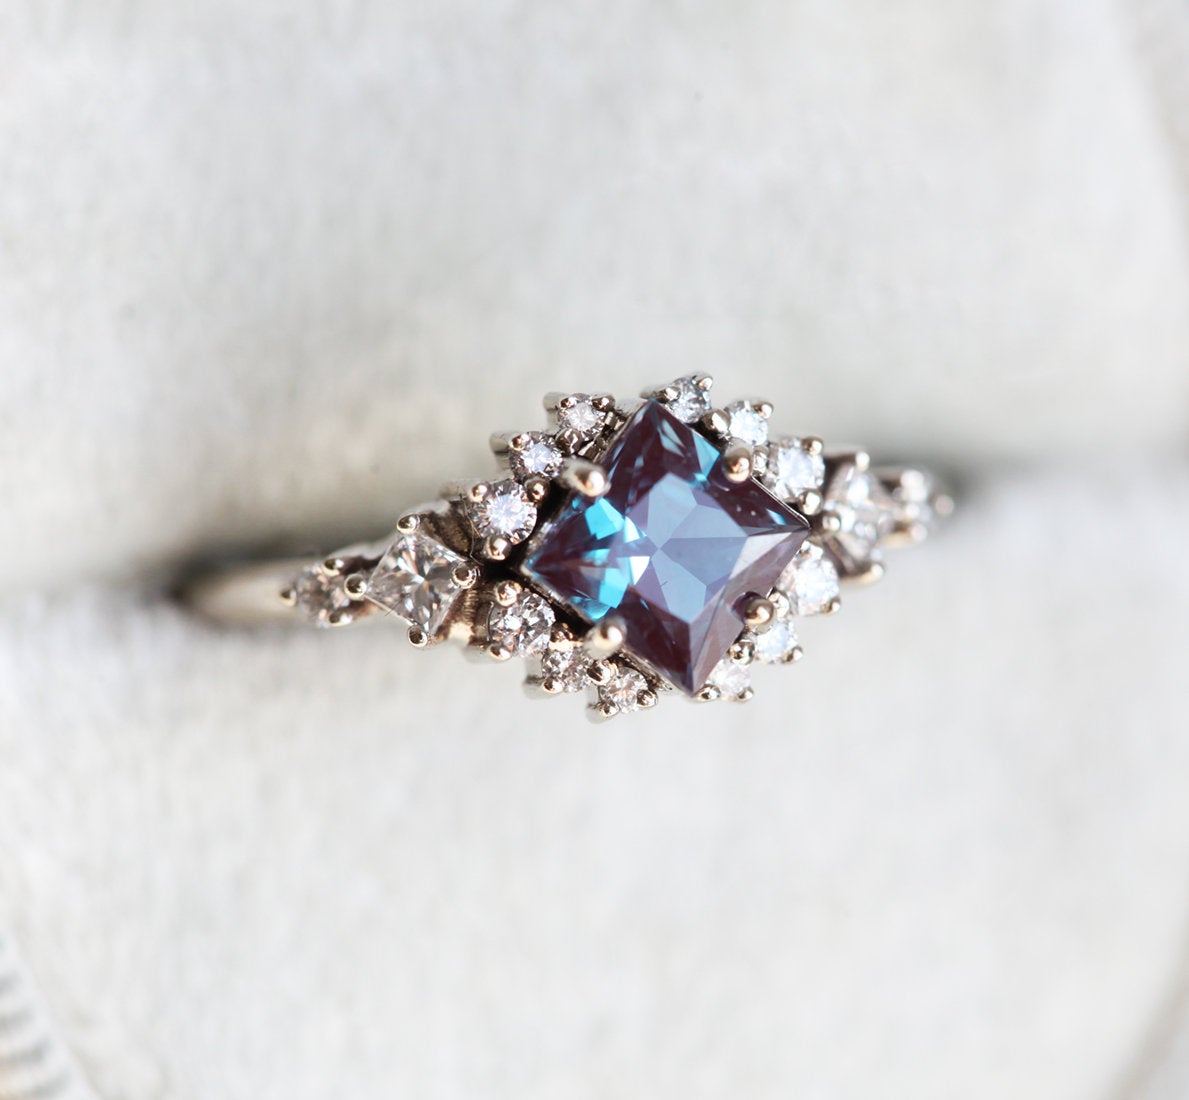 Teal Square Alexandrite Ring with Side Princess-Cut and Round White Diamonds